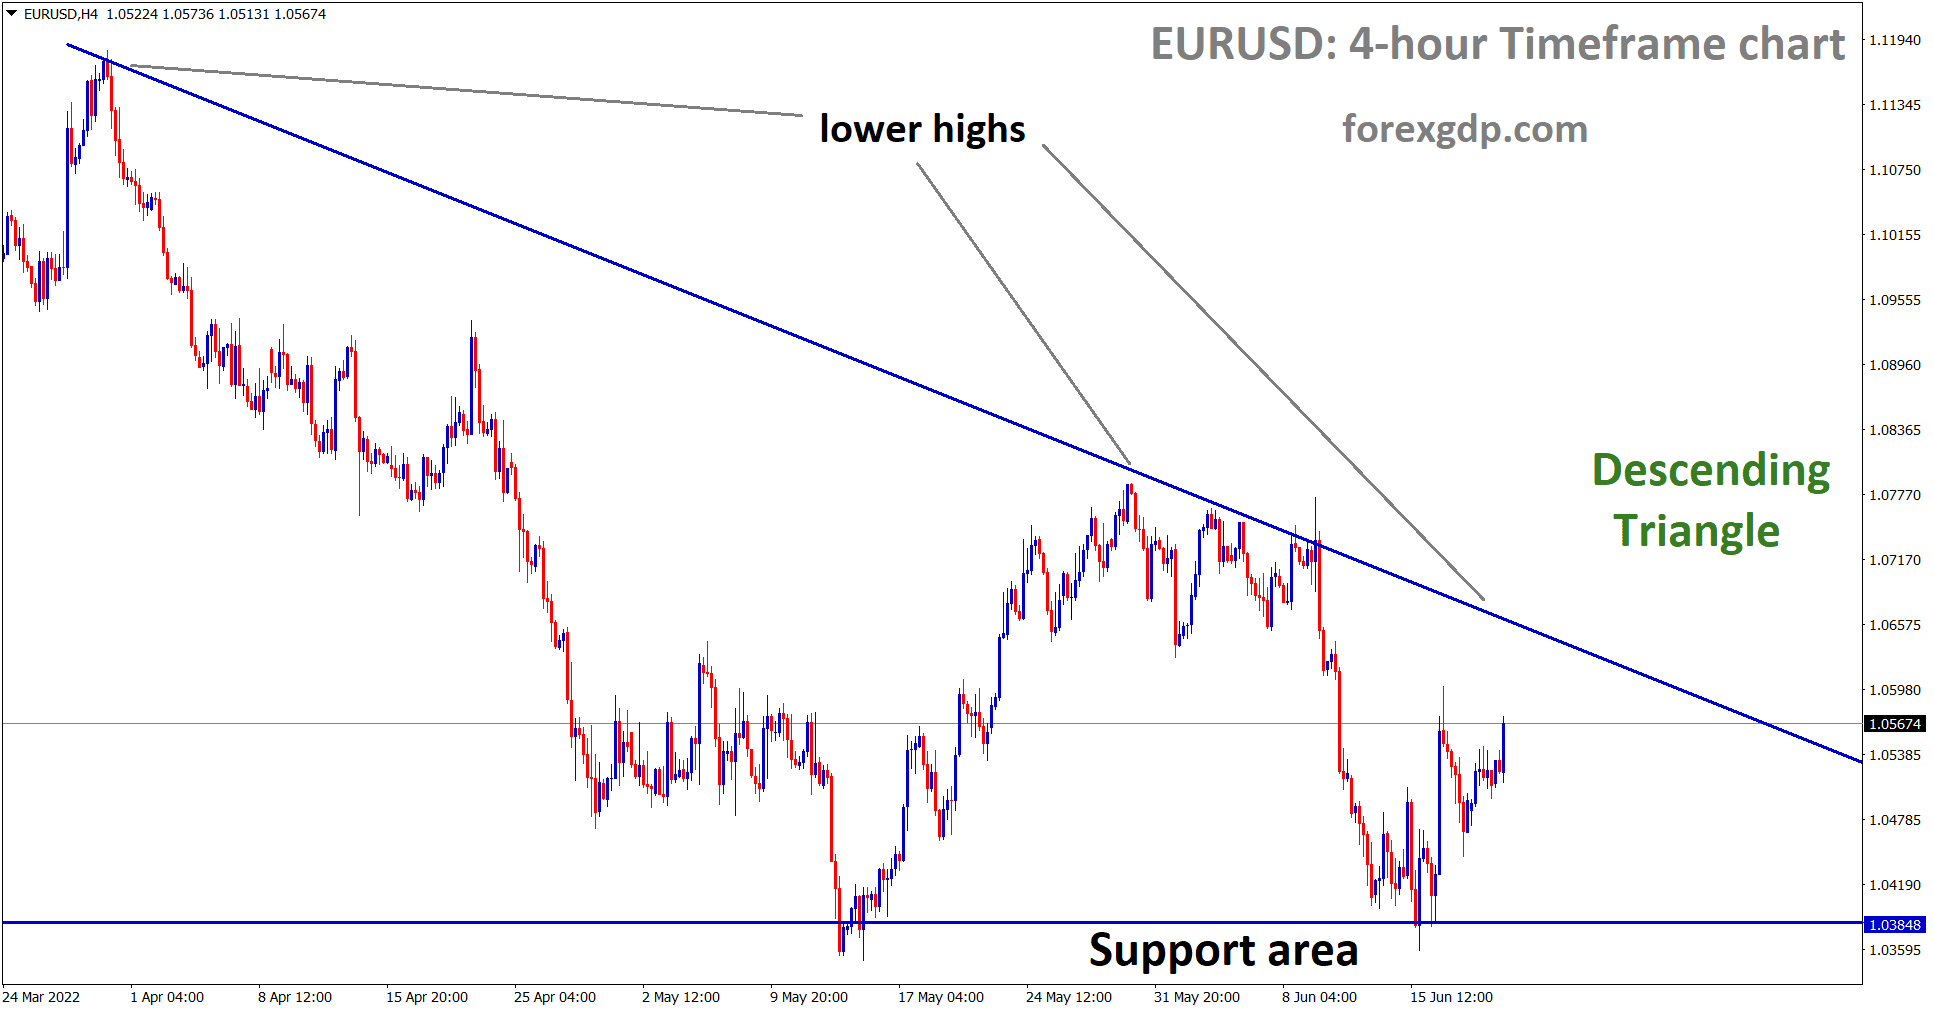 EURUSD is moving in Descending Triangle and the market has rebounded from the support area of the pattern